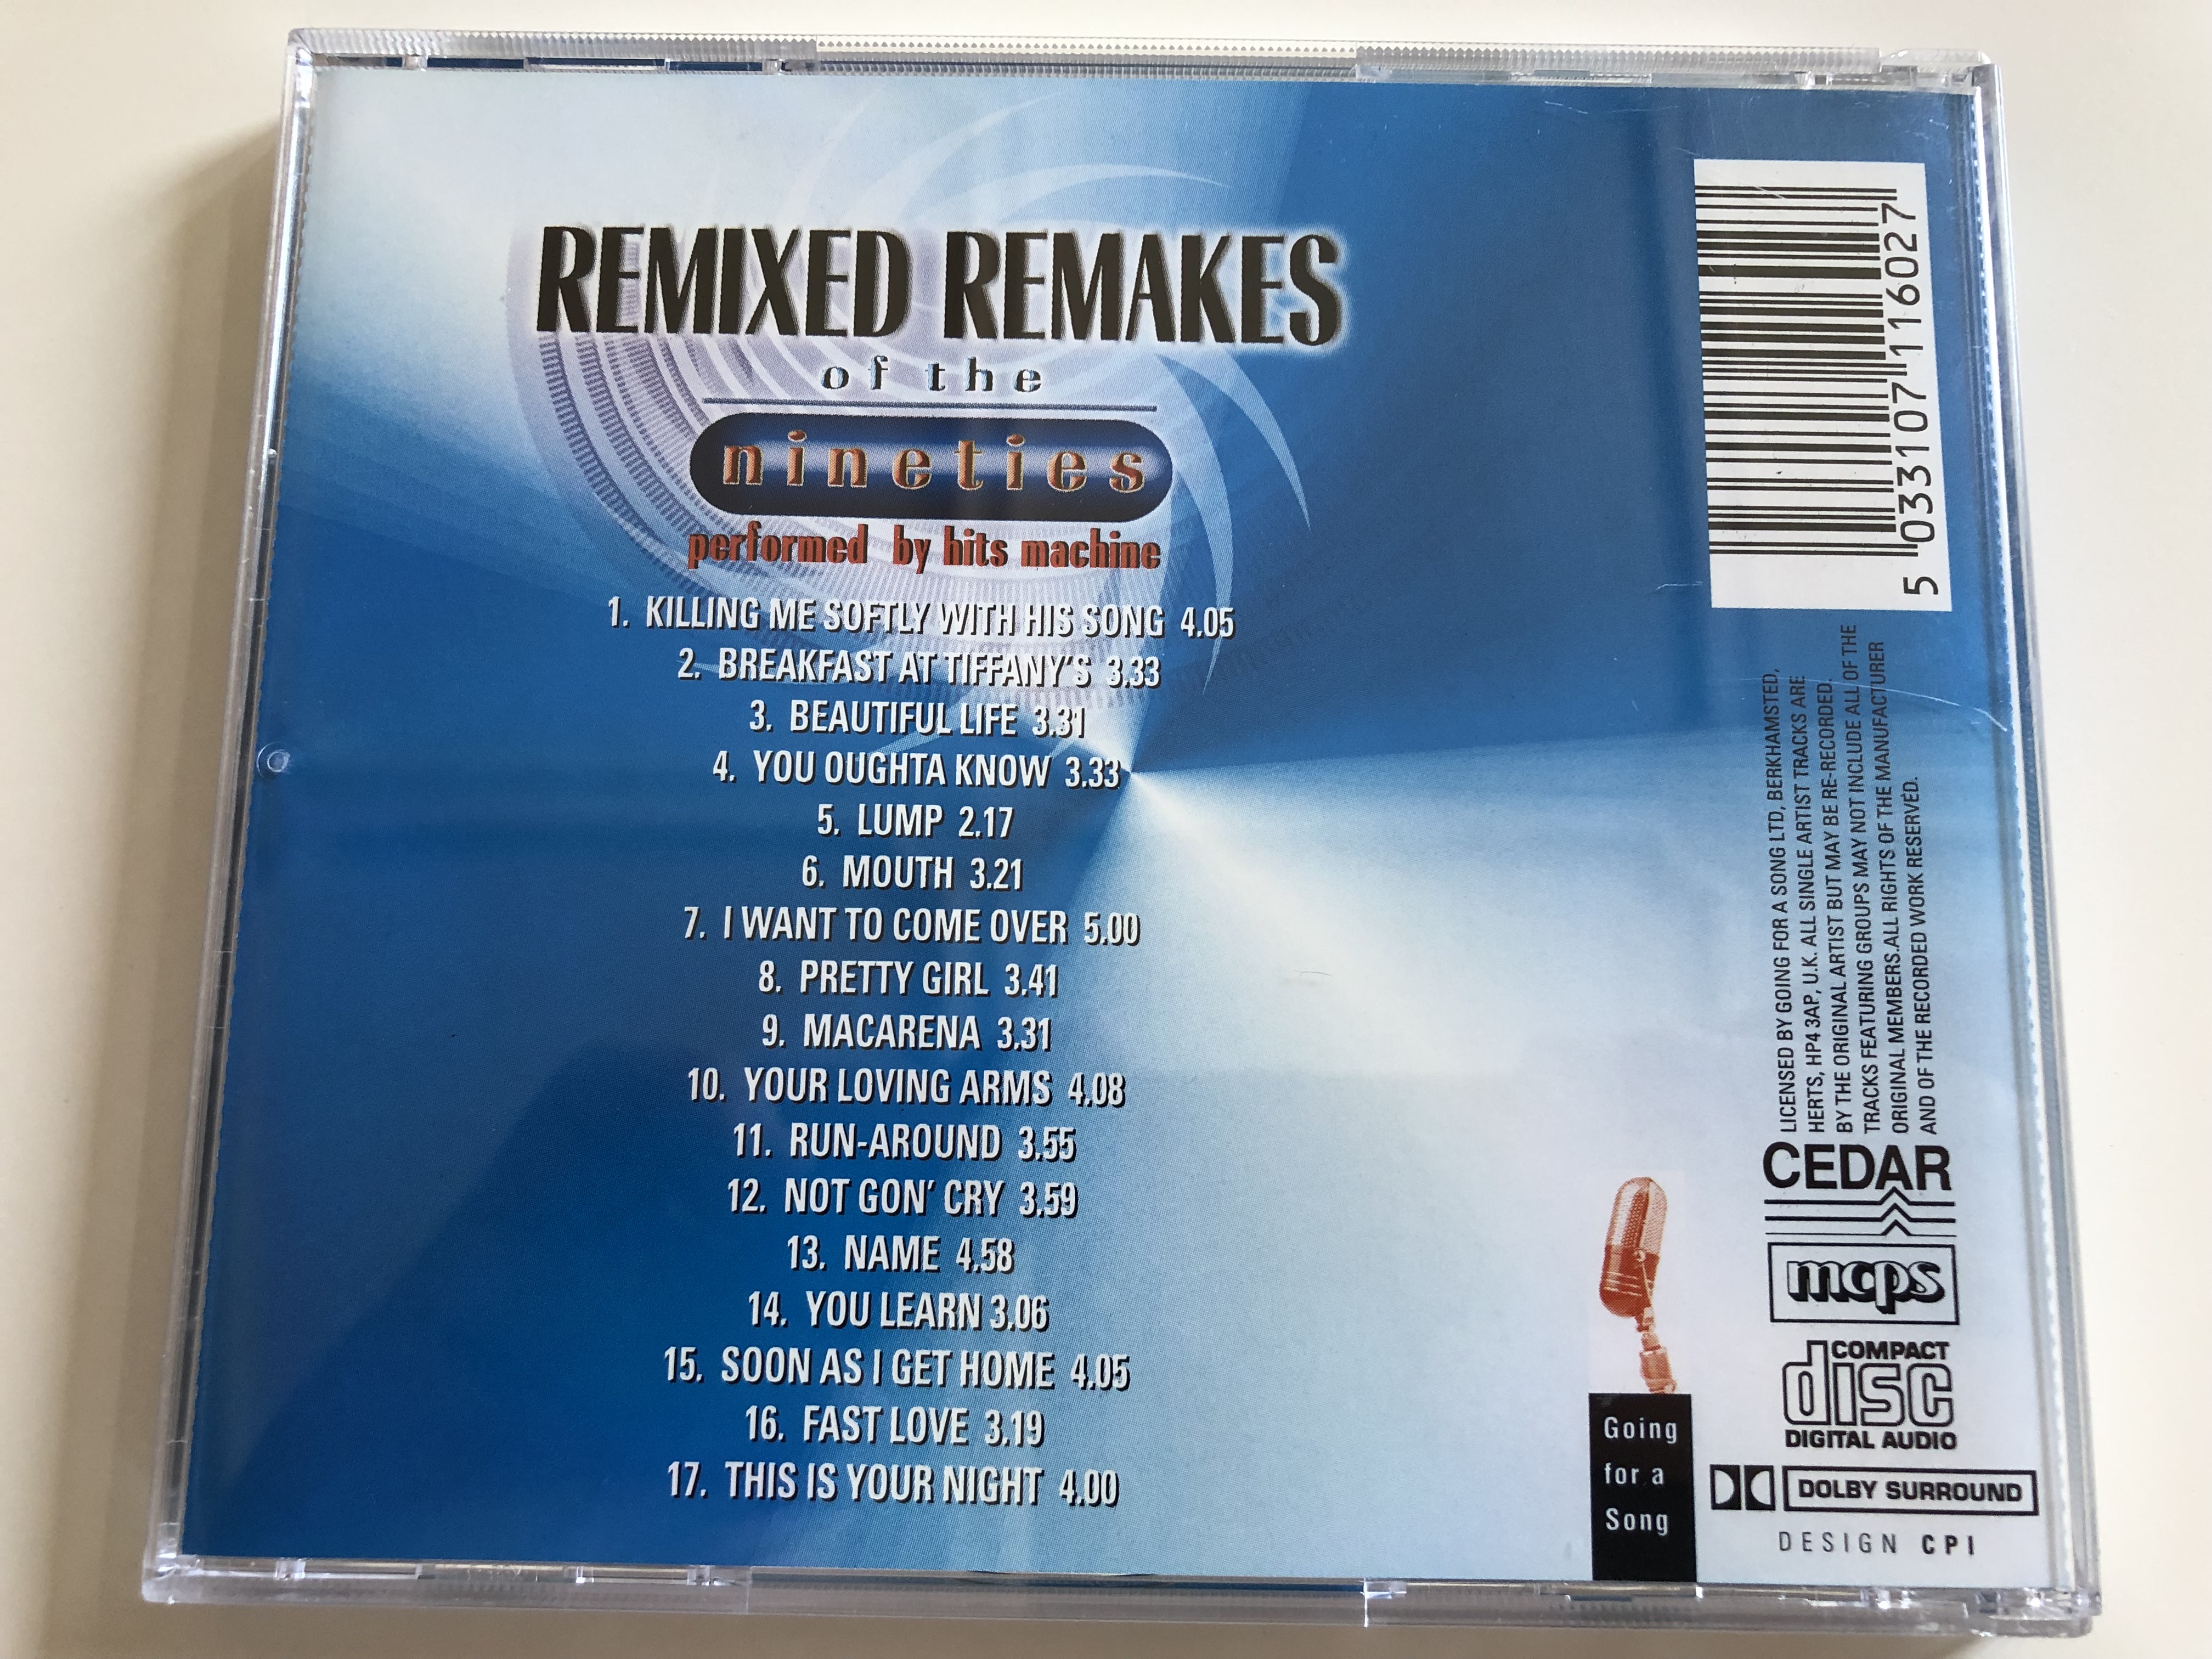 remixed-remakes-of-the-nineties-performed-by-hits-machine-beautiful-life-macarena-fast-love-i-want-to-come-over-you-oughta-know-killing-me-softly-and-many-more...-going-for-a-song-aud-4-.jpg